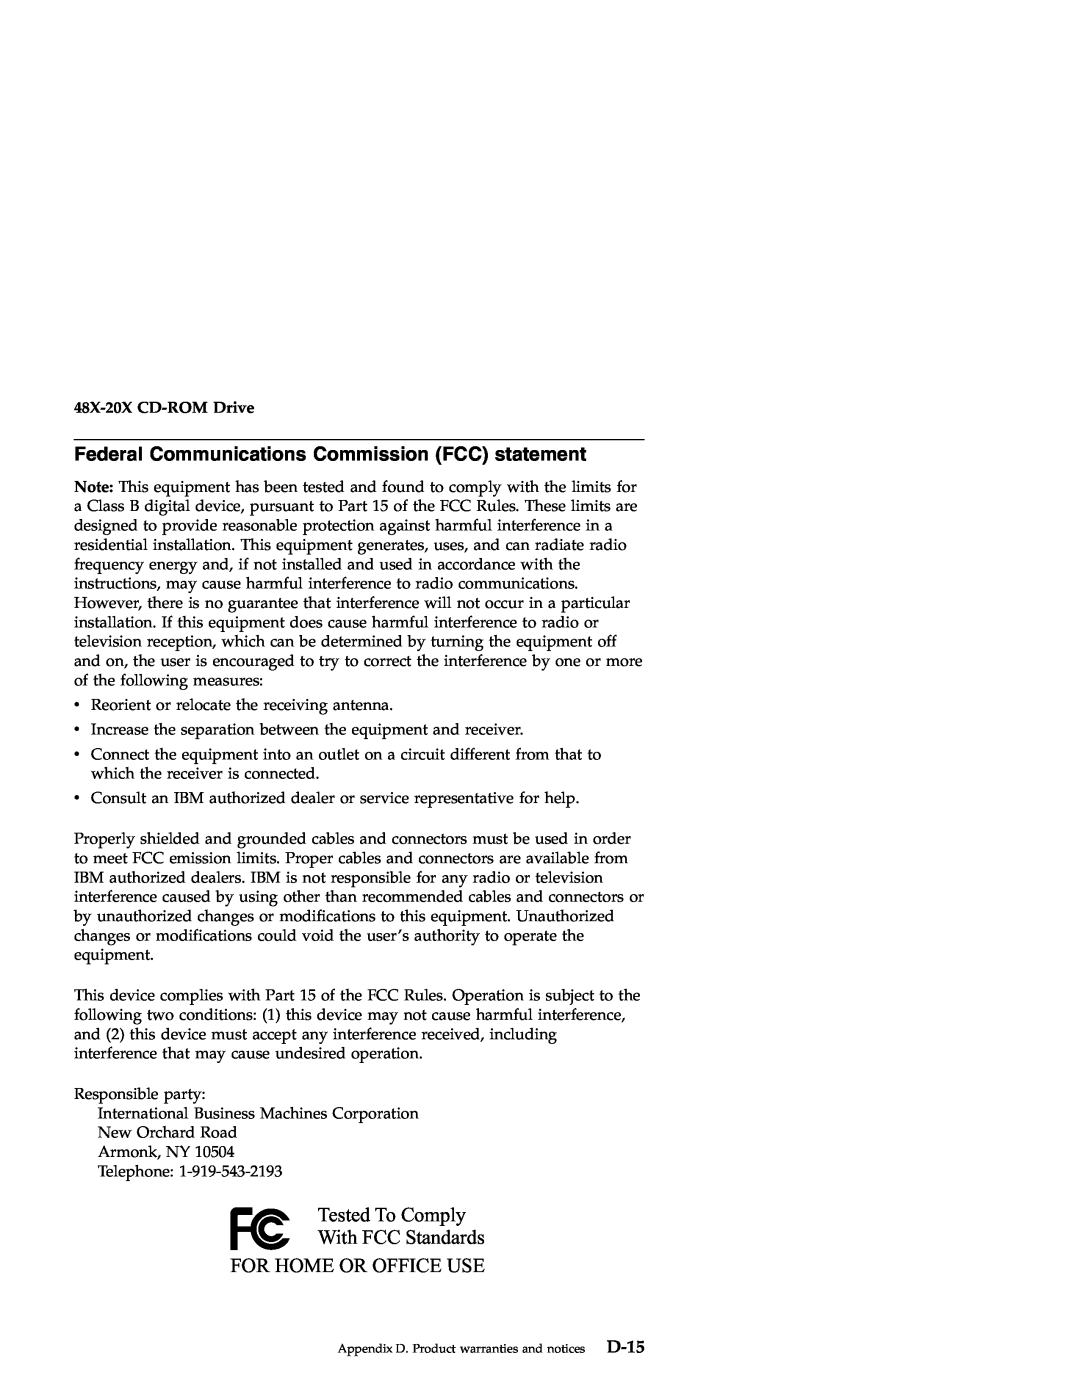 IBM 71P7279 Federal Communications Commission FCC statement, Tested To Comply With FCC Standards FOR HOME OR OFFICE USE 